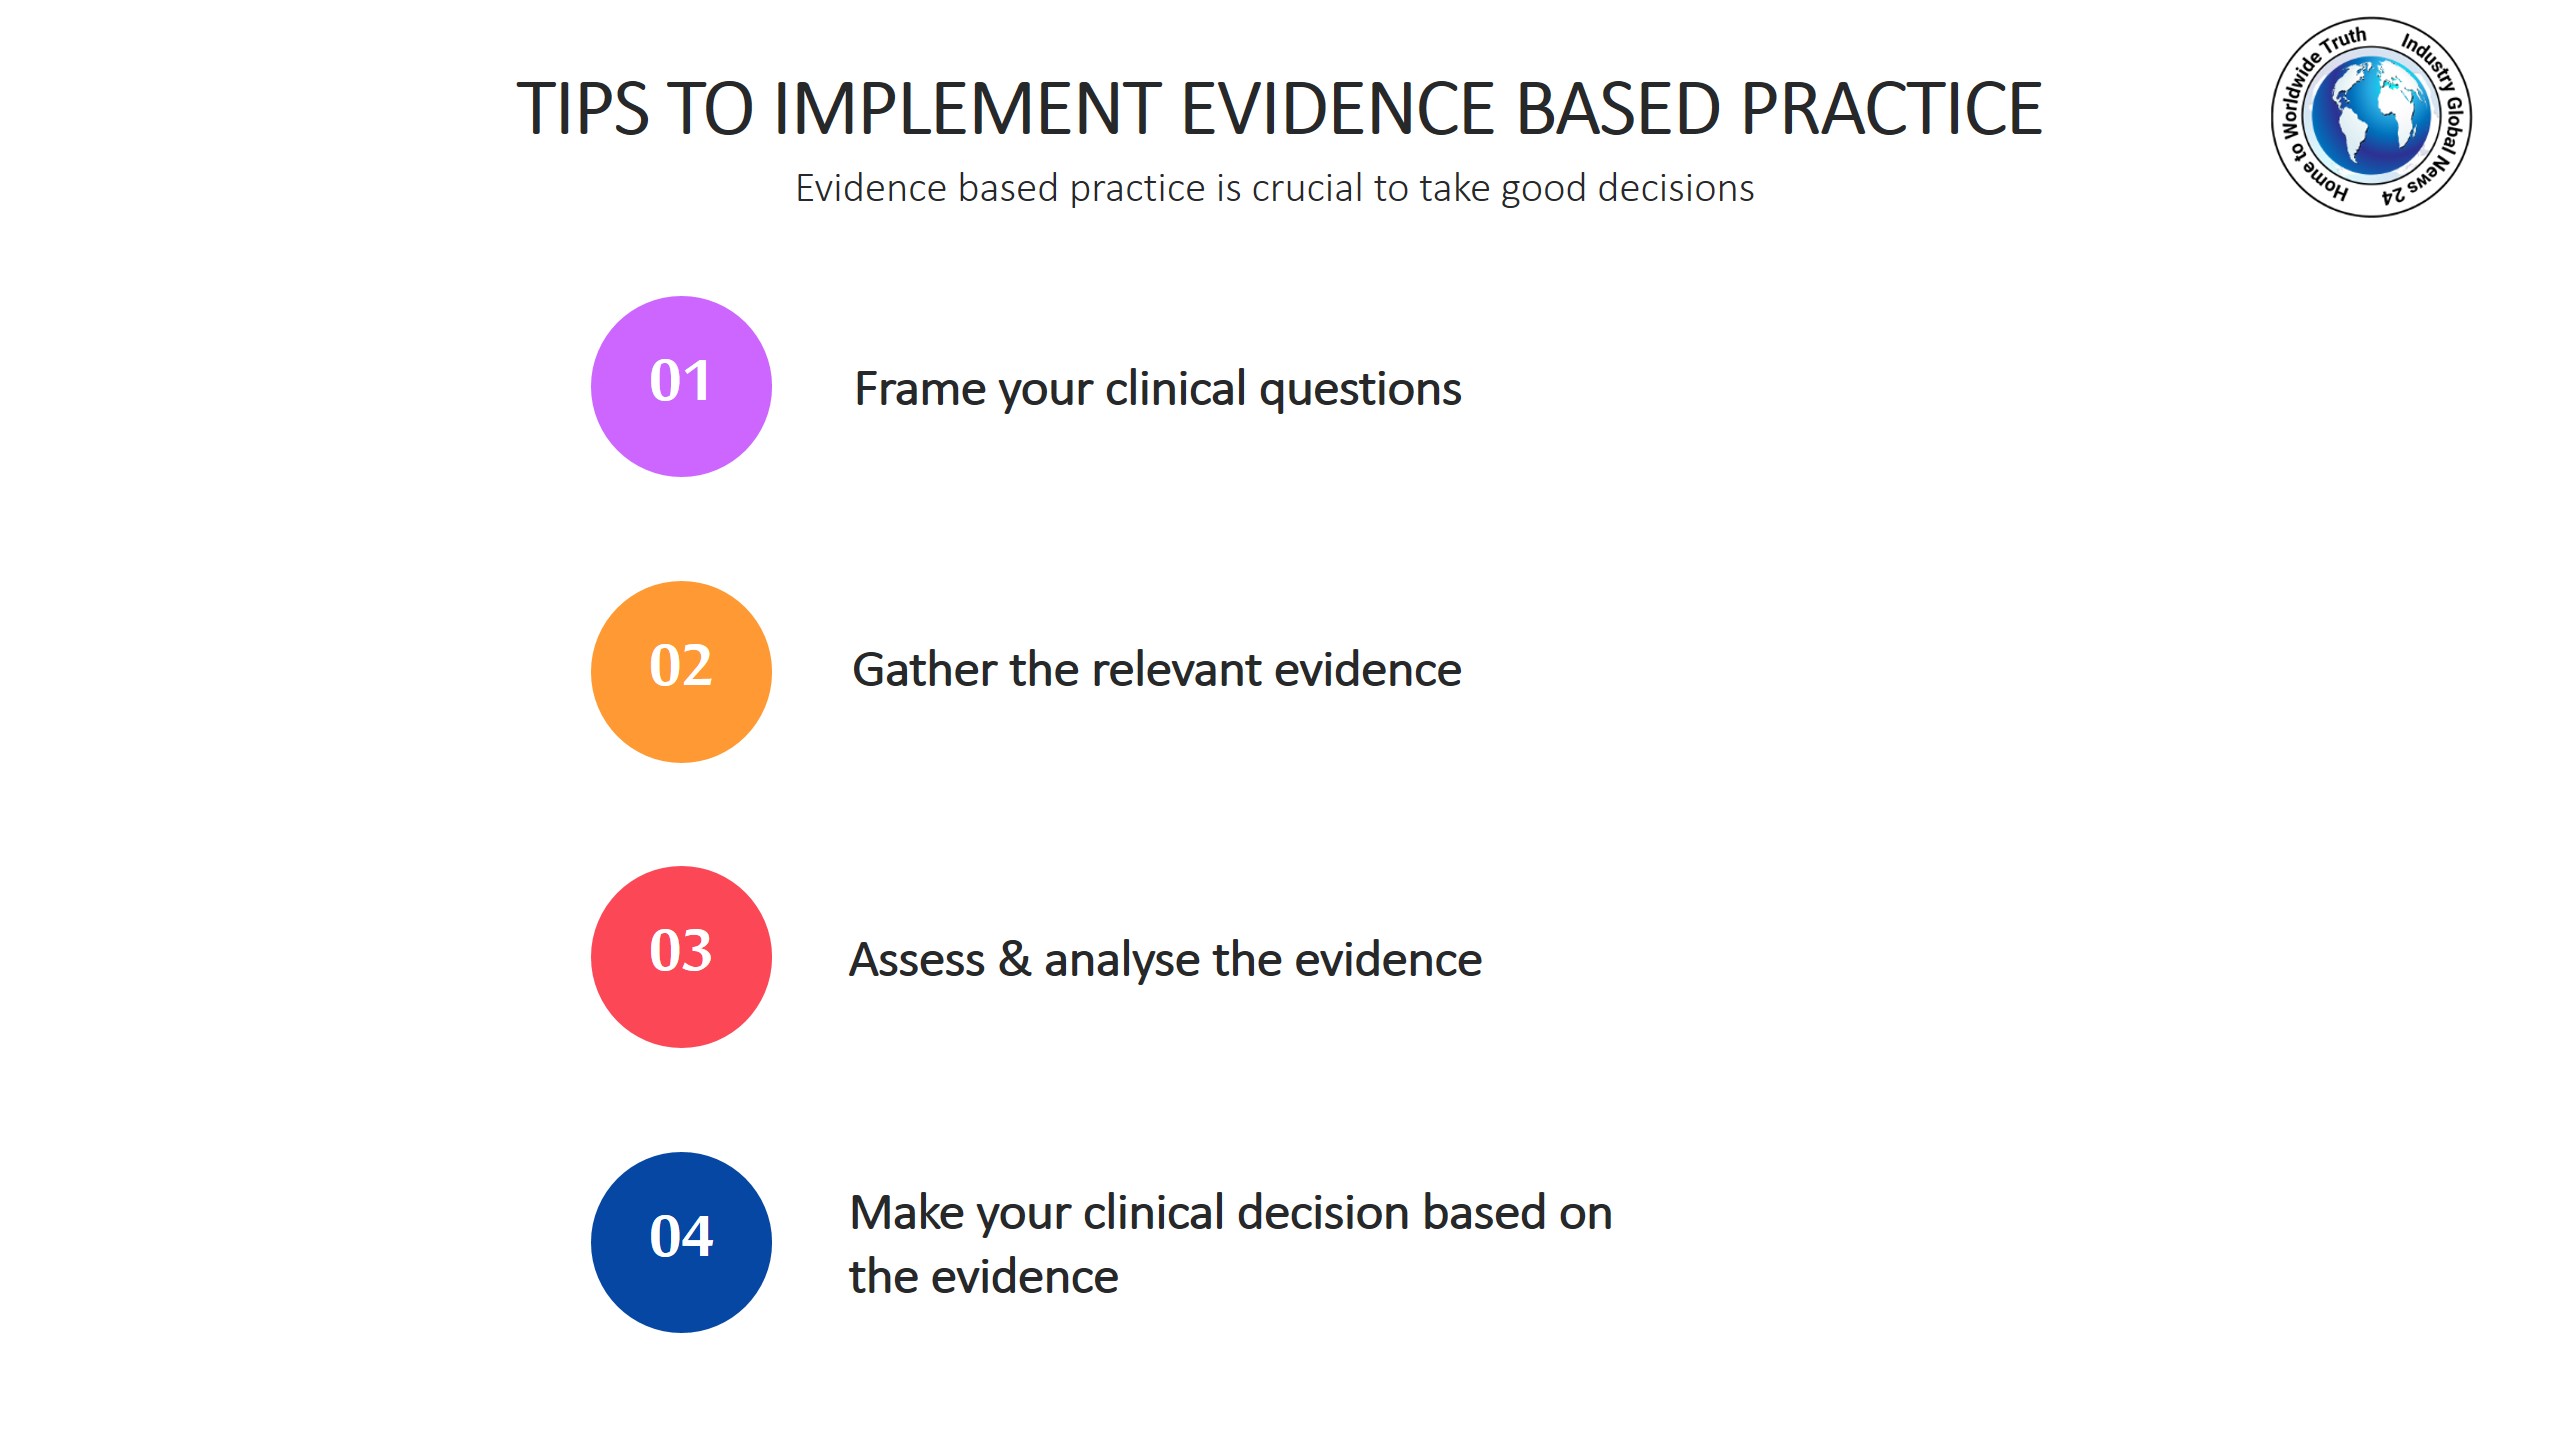 Tips to implement evidence based practice